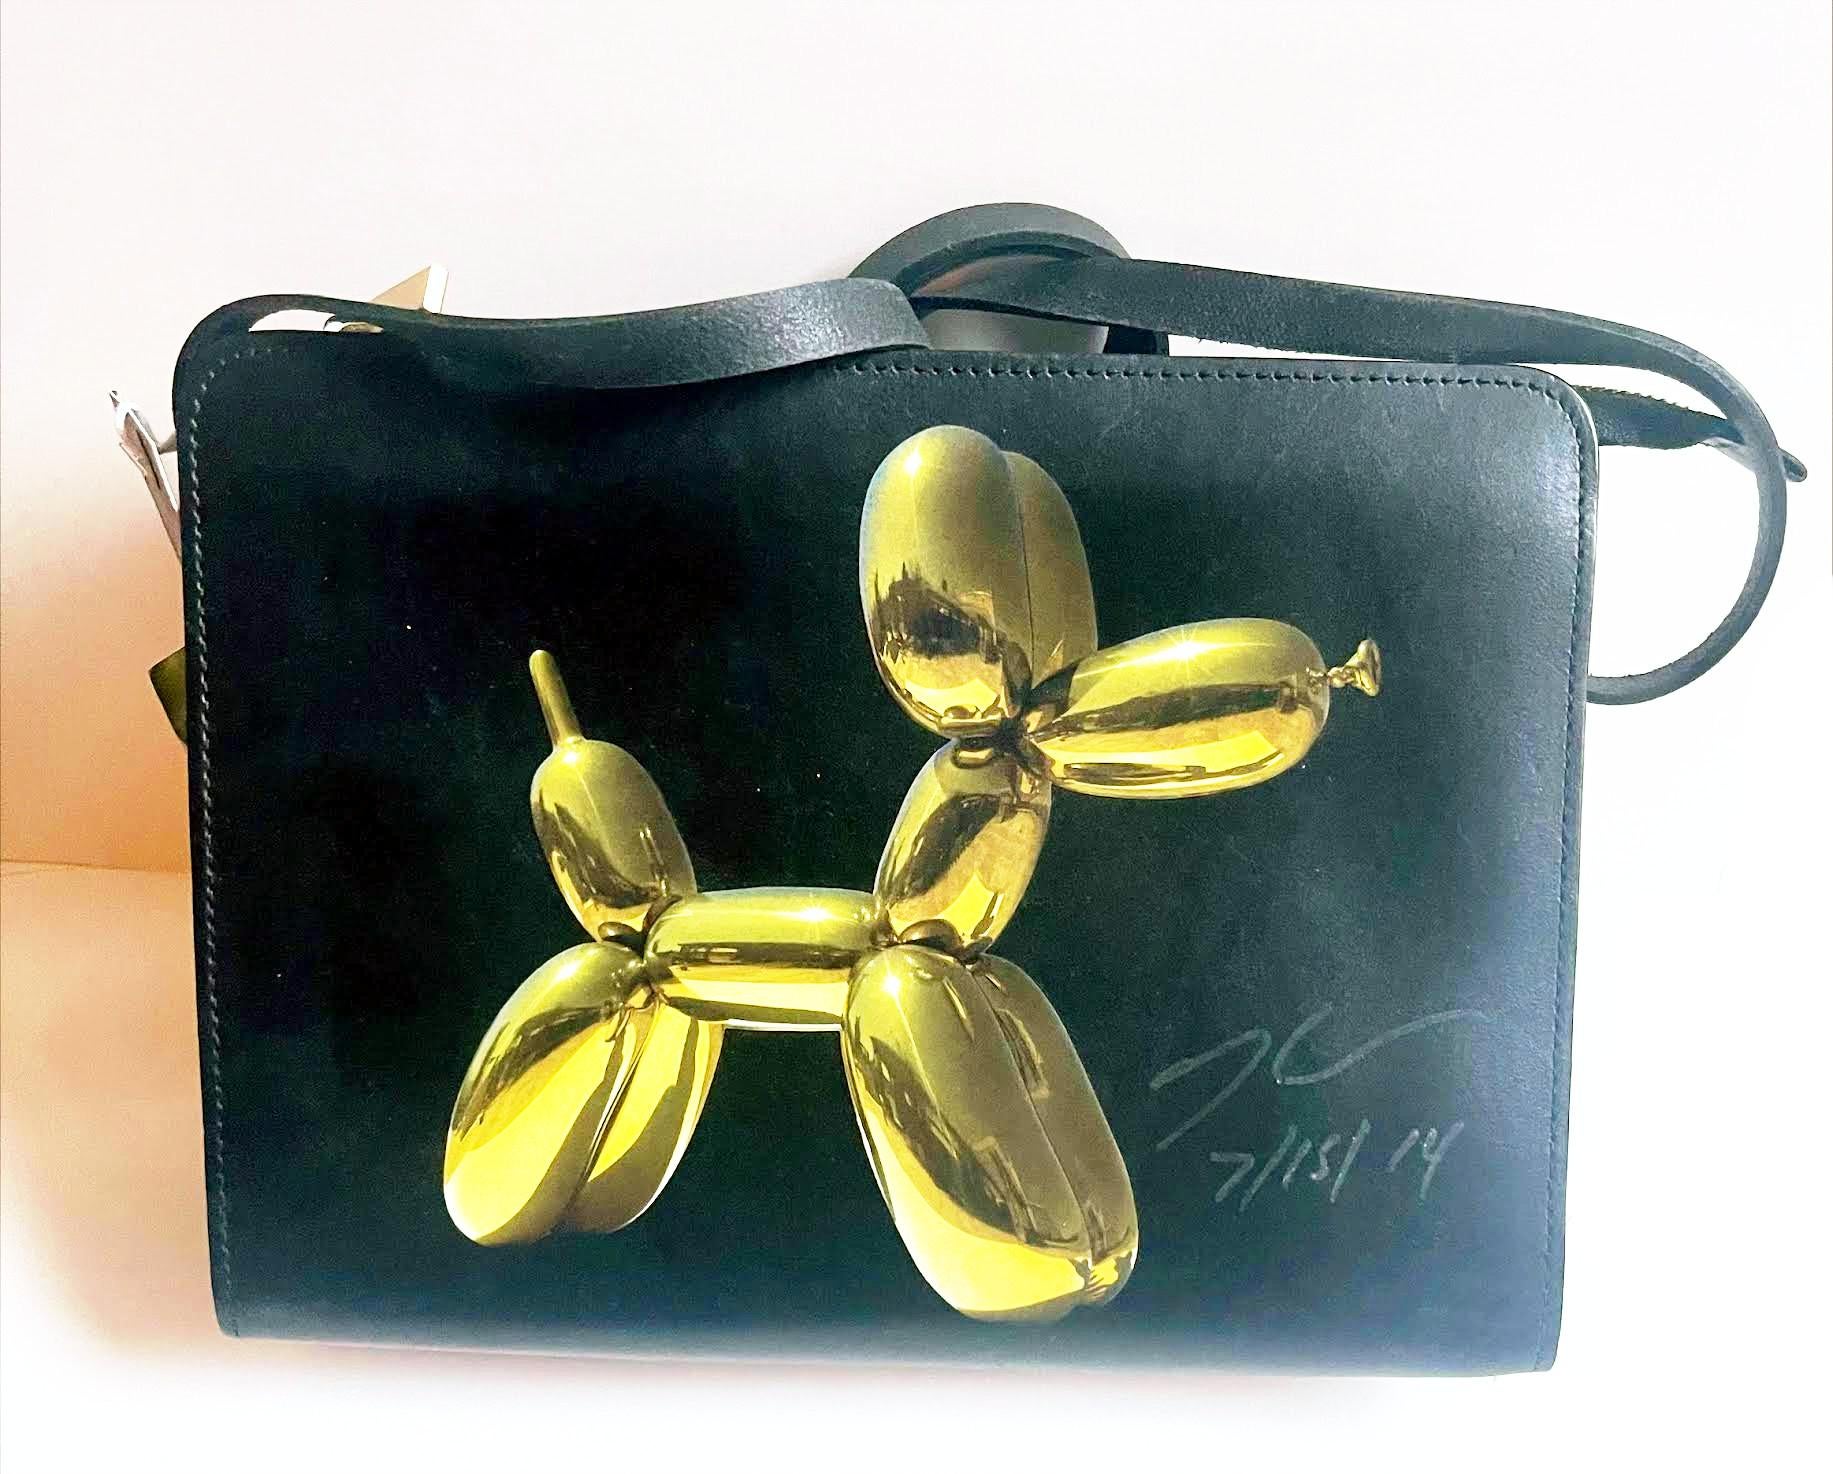 Balloon Dog Women's Shoulder Bag (Hand Signed by Jeff Koons)